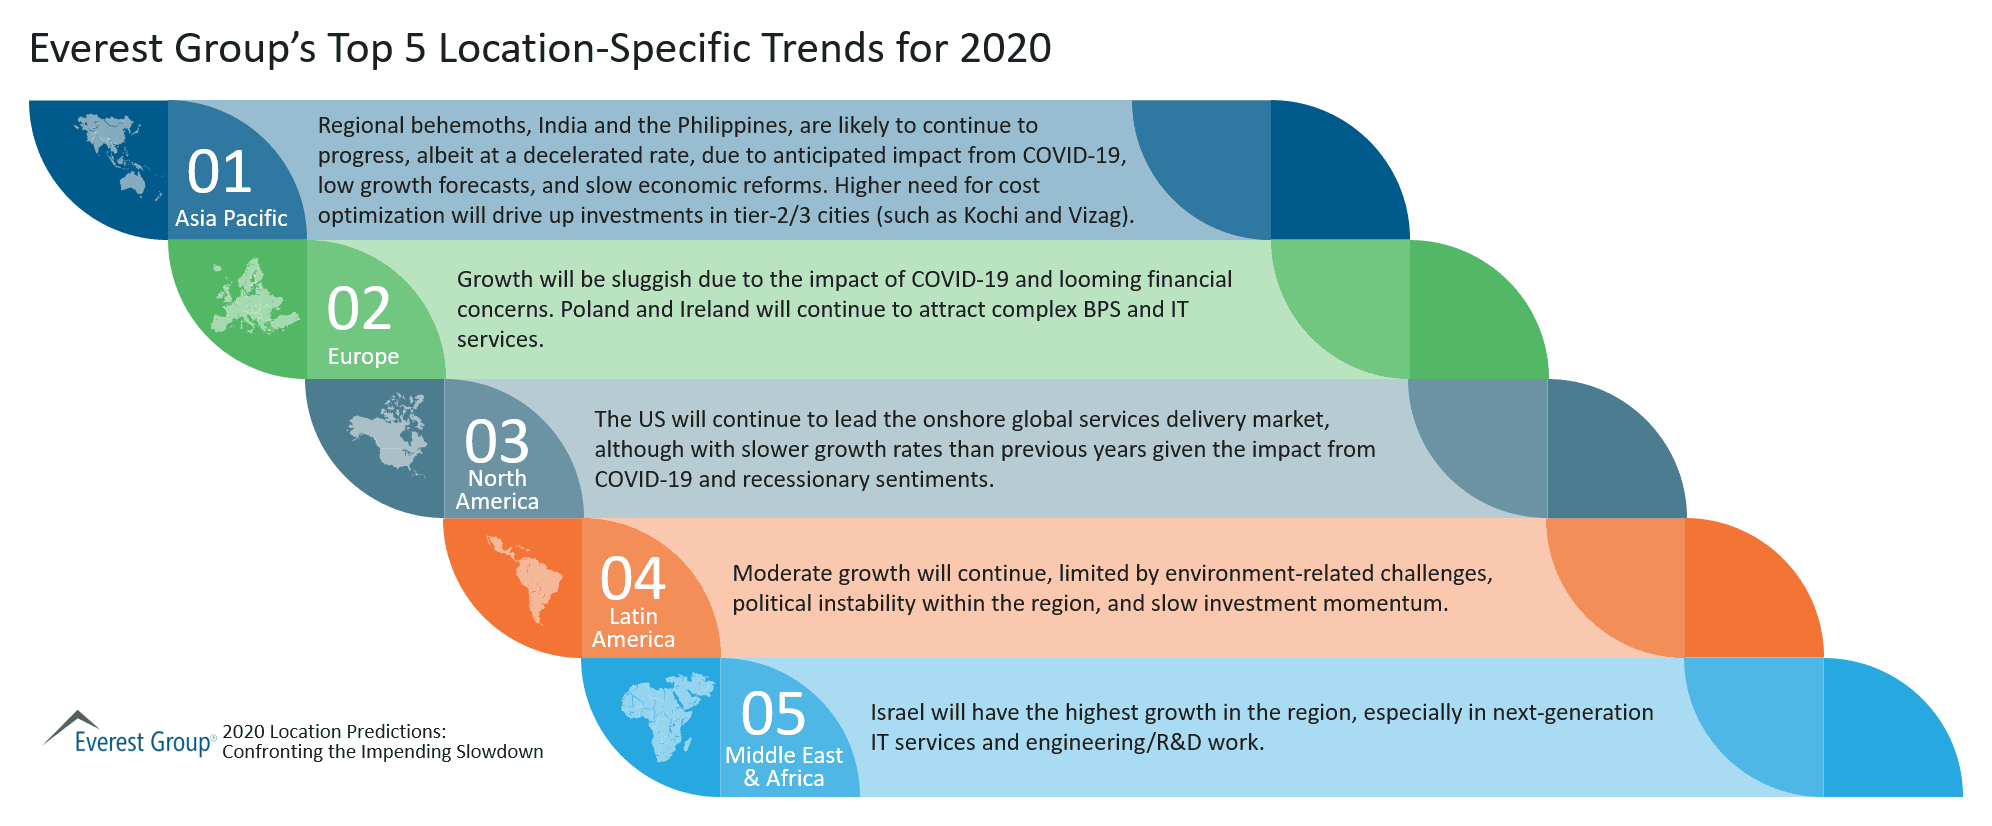 Everest Group Top 5 Location-Specific Trends for 2020